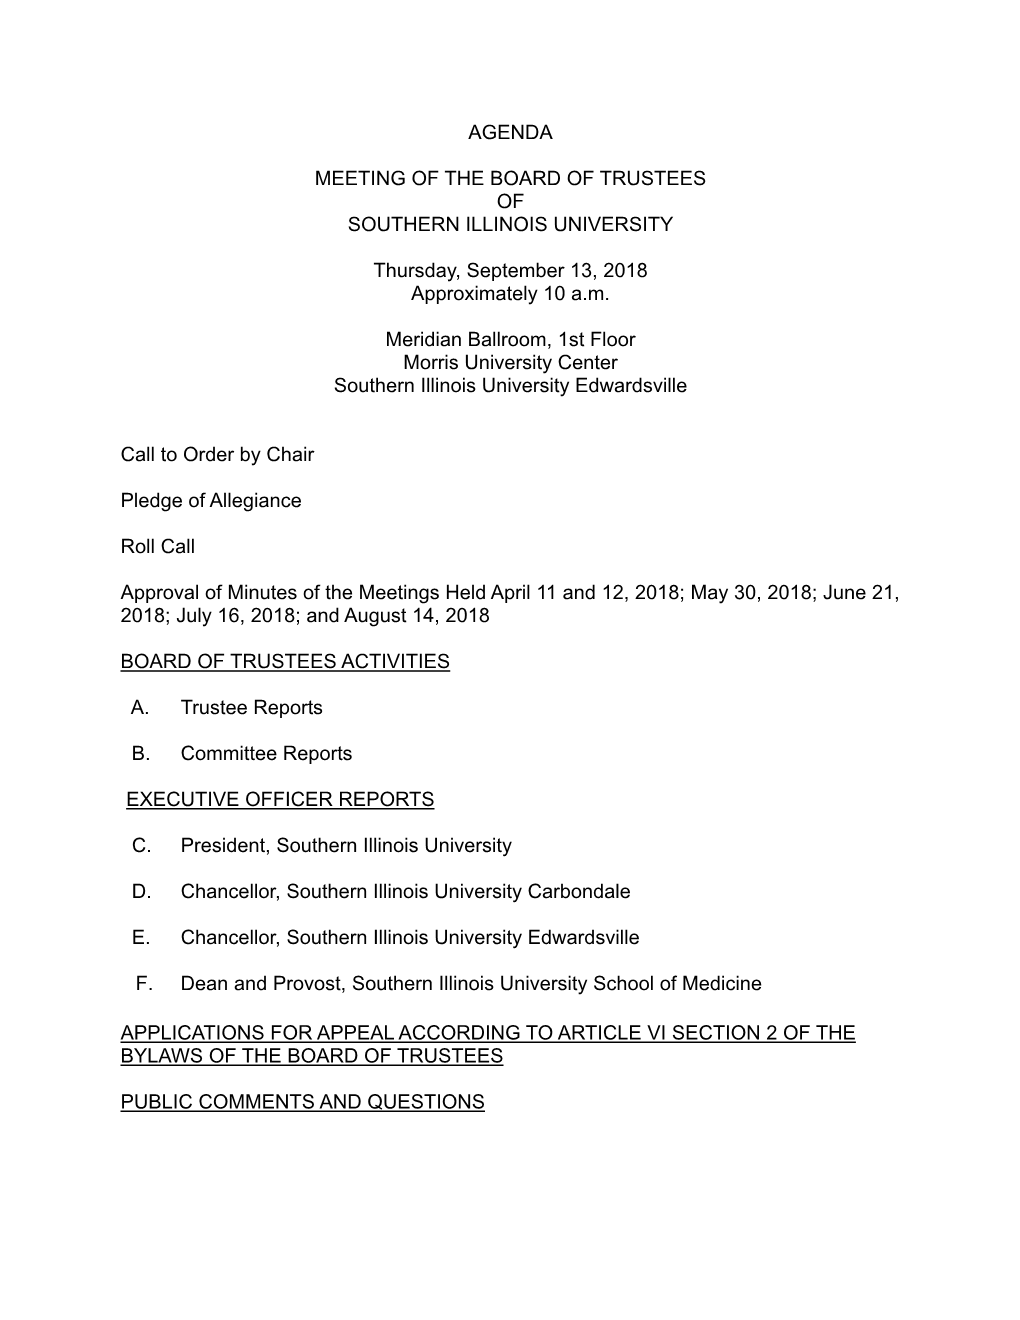 AGENDA MEETING of the BOARD of TRUSTEES of SOUTHERN ILLINOIS UNIVERSITY Thursday, September 13, 2018 Approximately 10 A.M. Merid